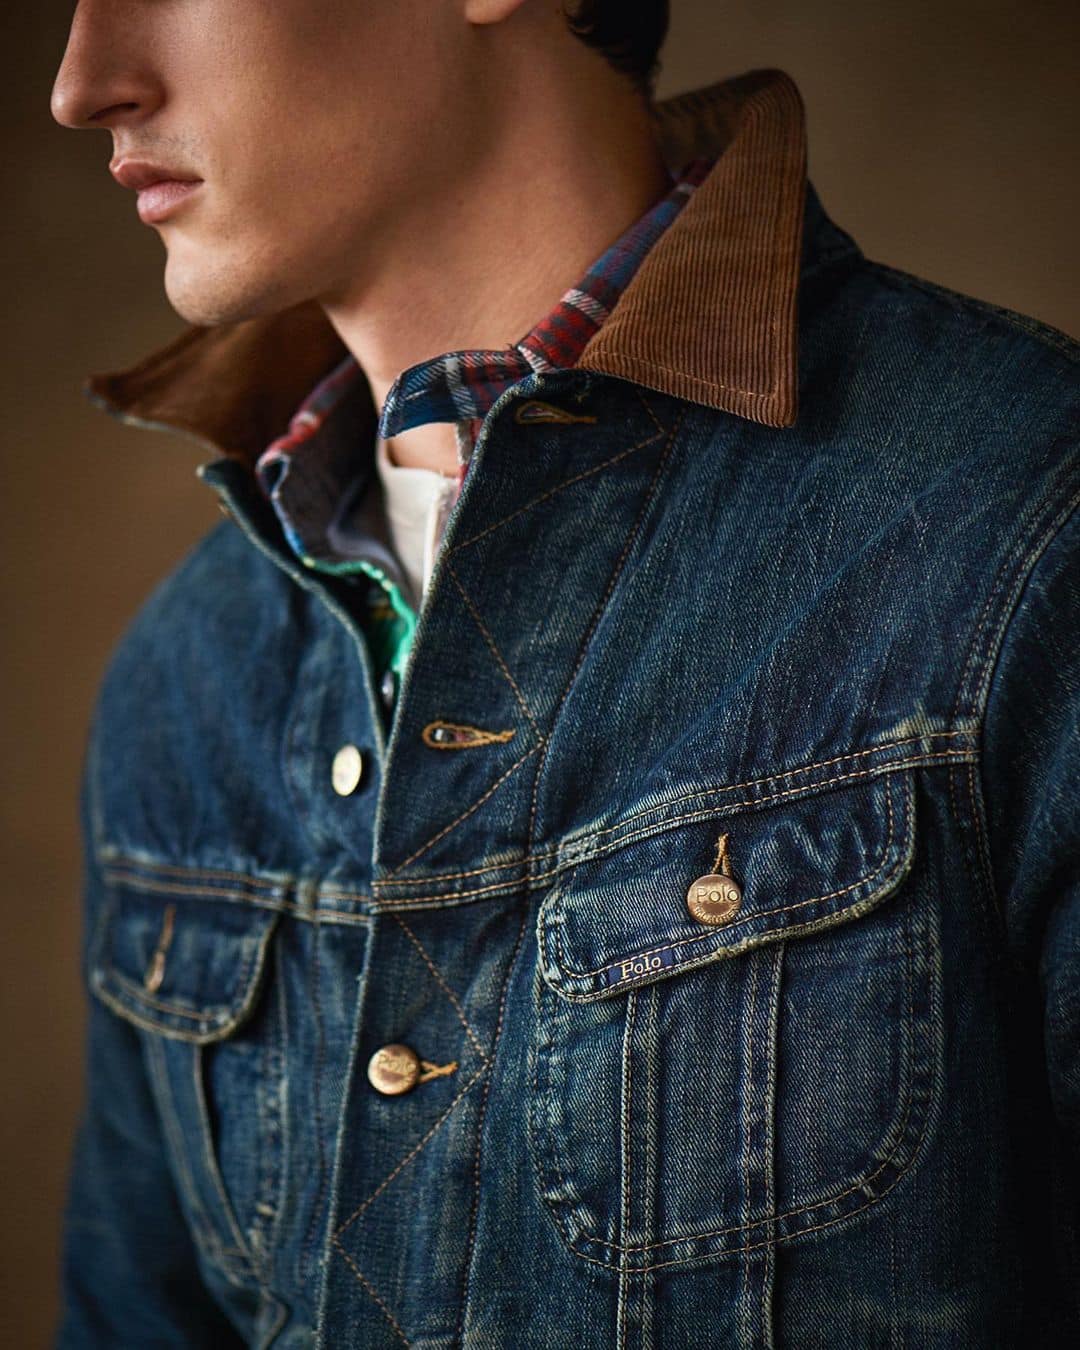 Leather Jacket or Jean Jacket For Men | Which Should You Buy?